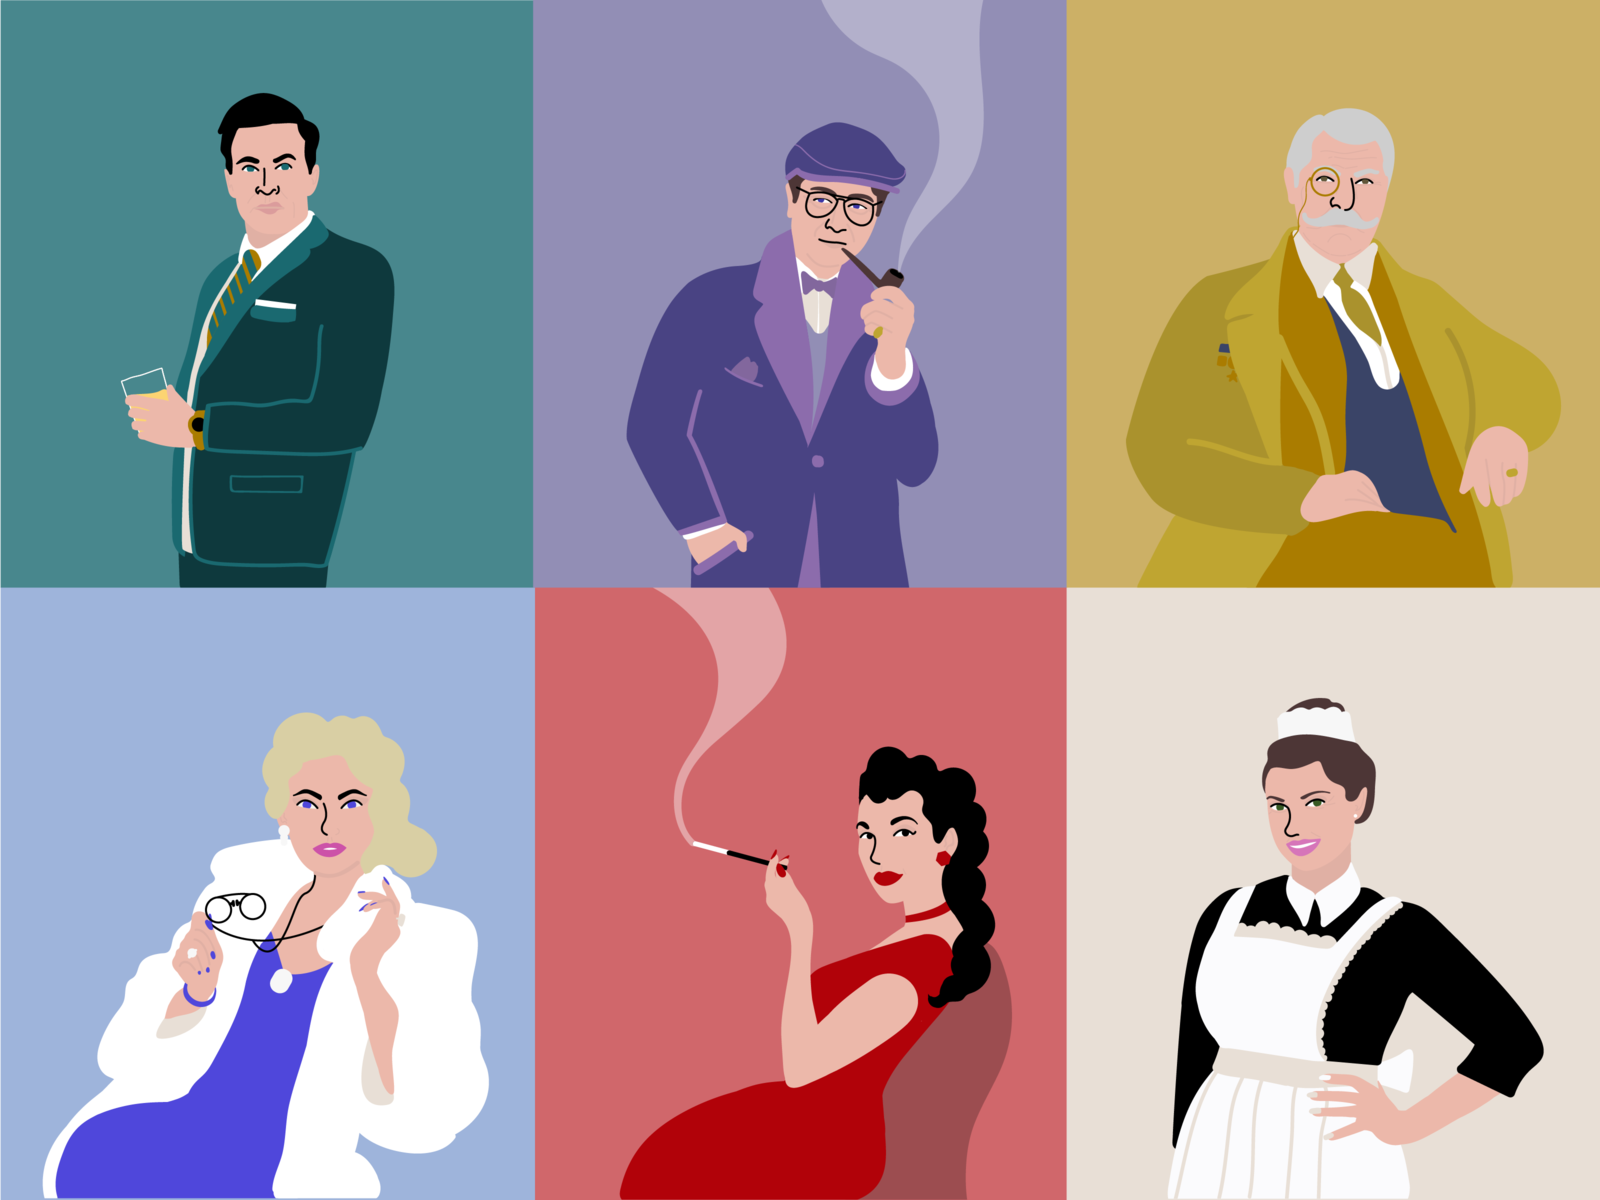 Clue Characters by Sari Jack on Dribbble